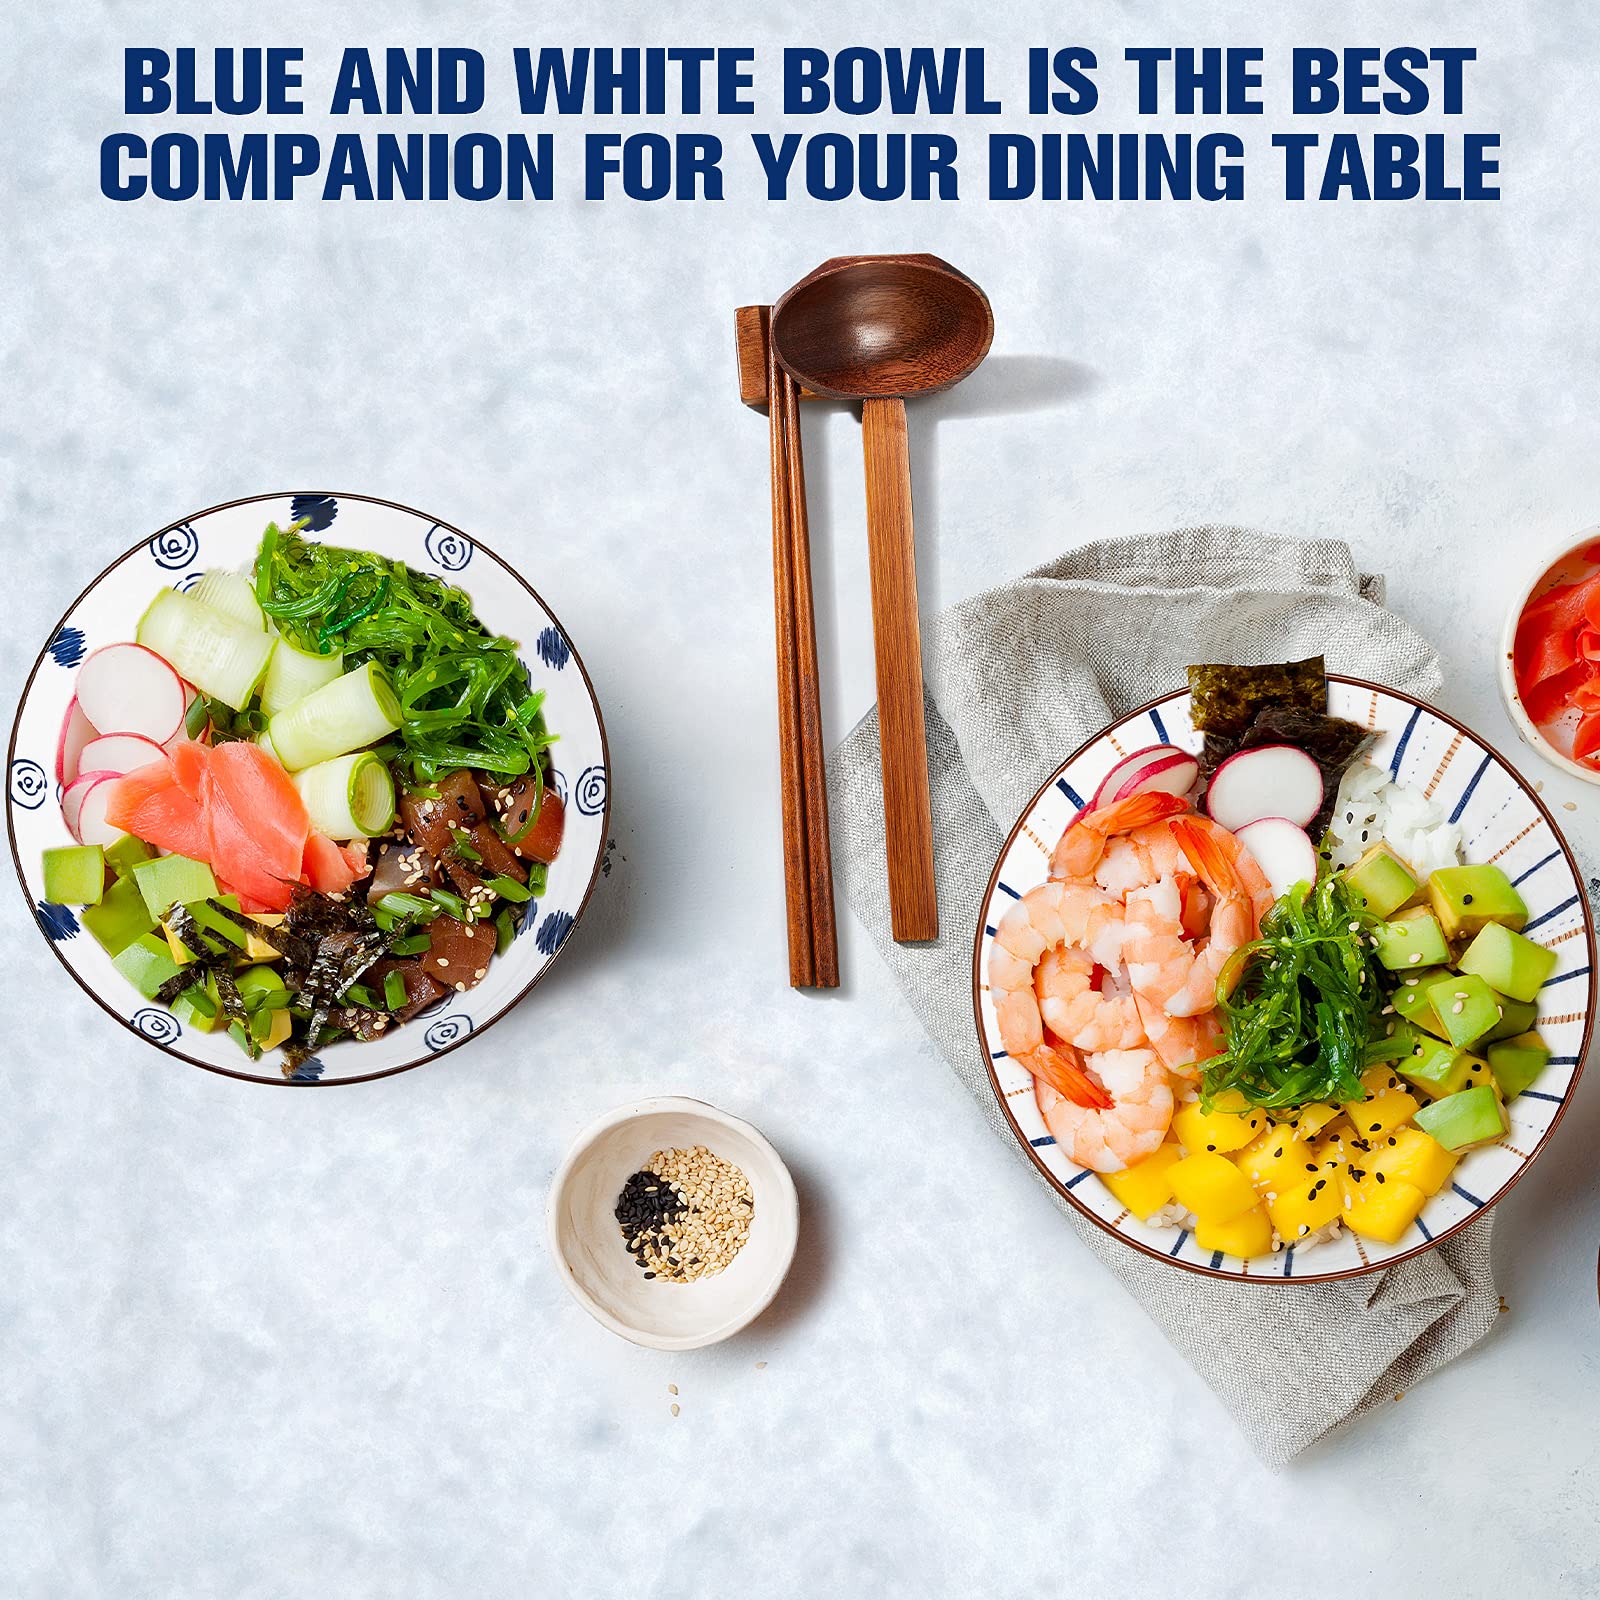 4 Sets Ceramic Japanese Ramen Bowls 40 Ounce Large Ceramic Noodle Serving Bowl with Spoons, Chopsticks and Chopstick Stands for Soup, Cereal, Rice, Udon, Asian Noodles, Blue and White (Stripe Style)